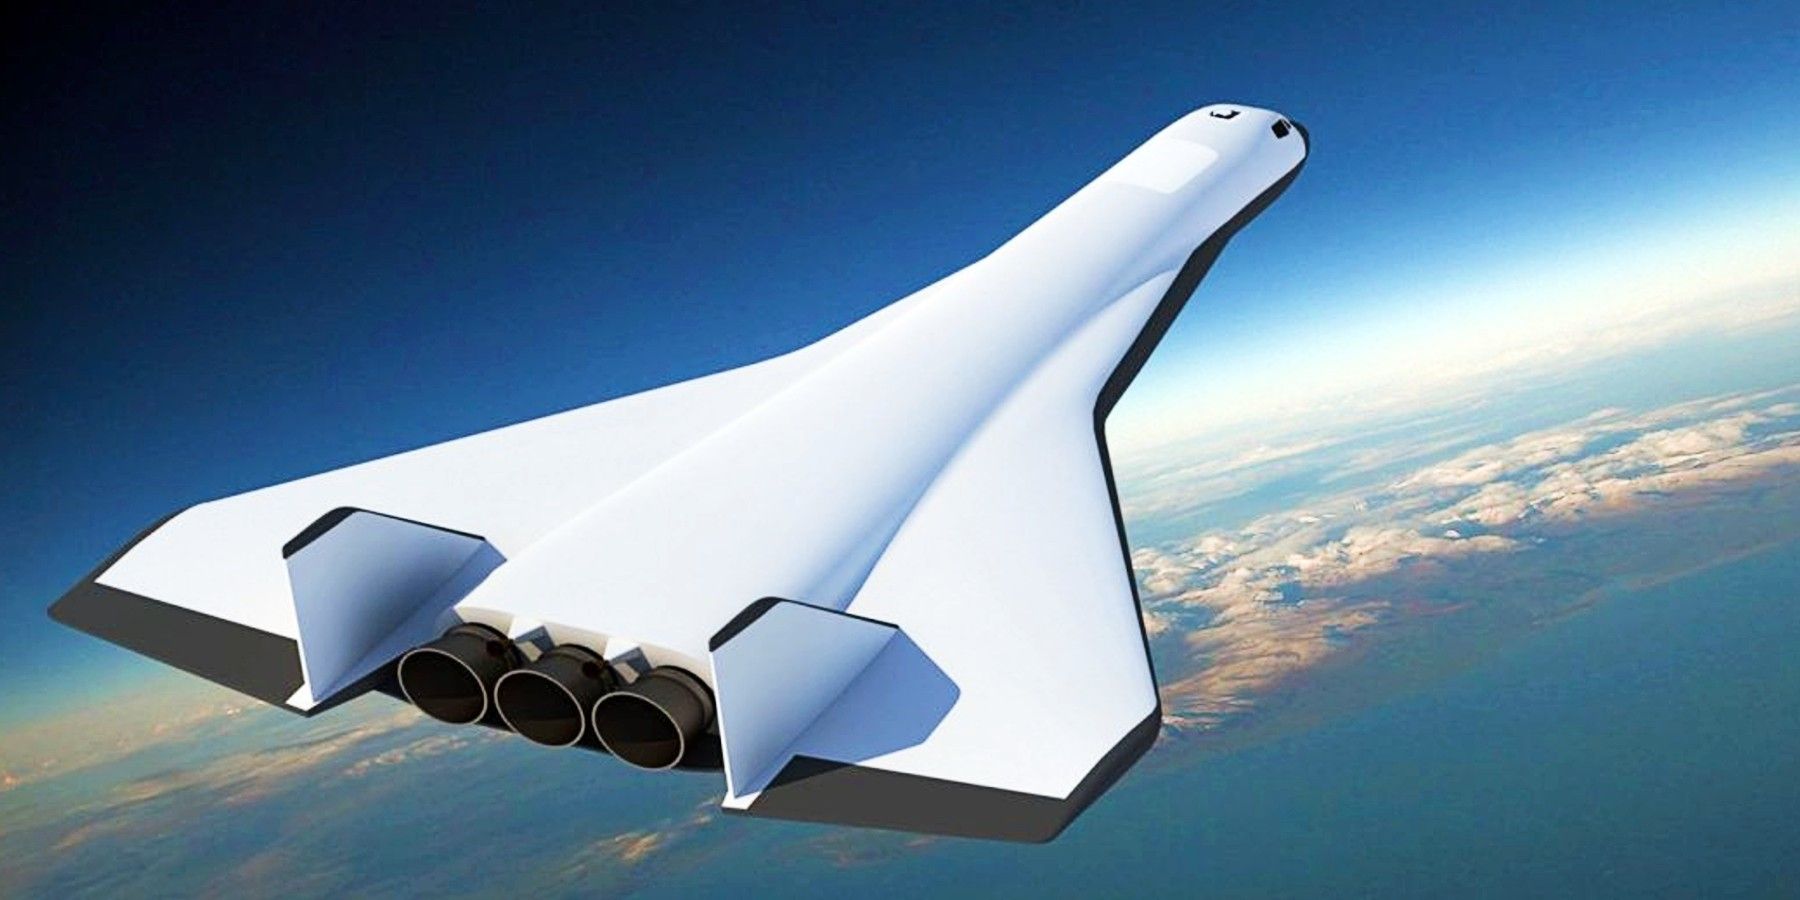 This Space Shuttle Can Launch Without A Rocket And Land Like A Plane